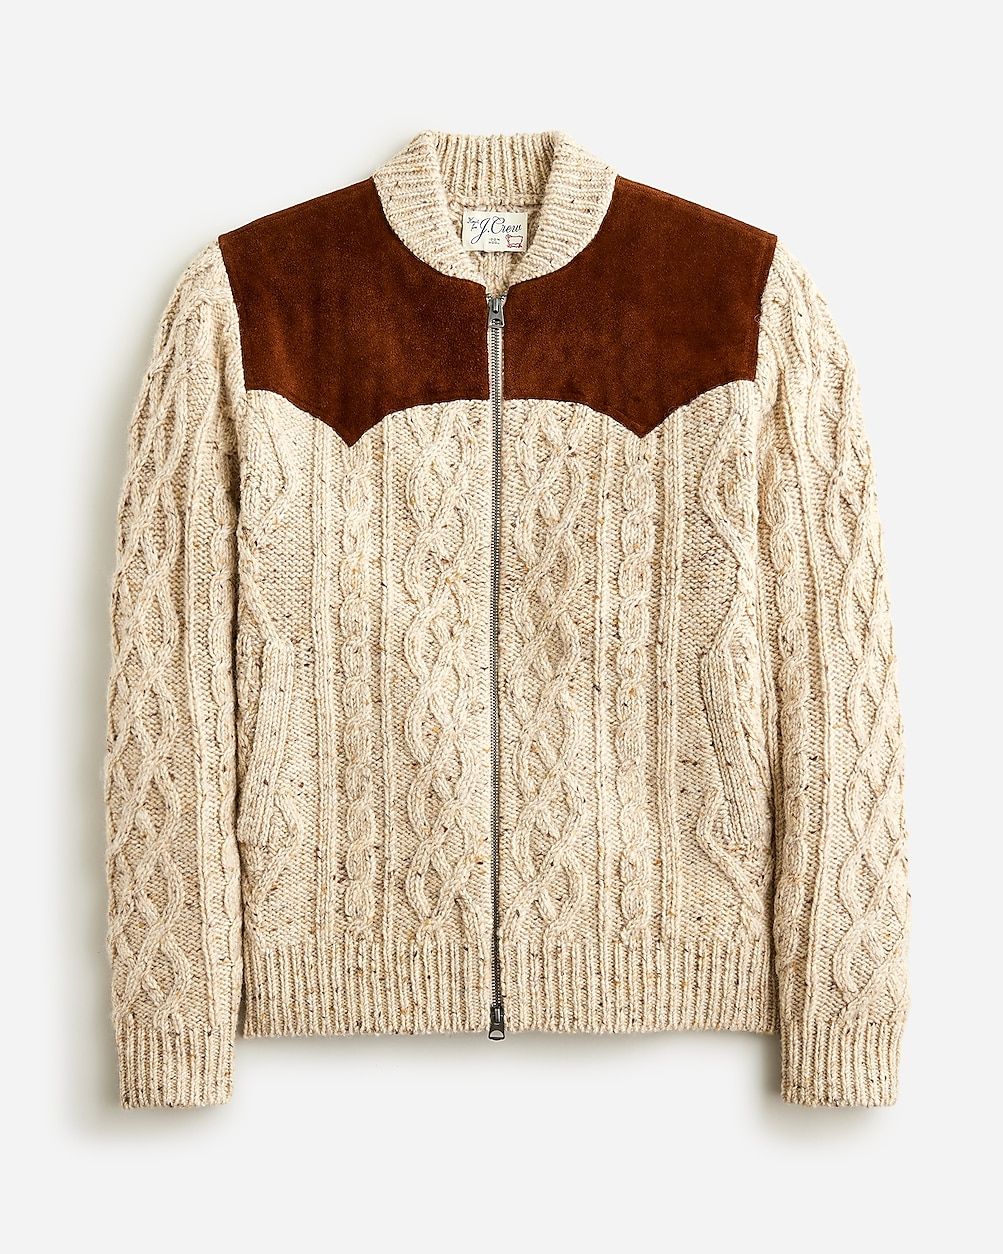 Donegal wool cable-knit zip-up sweater with Italian suede | J.Crew US